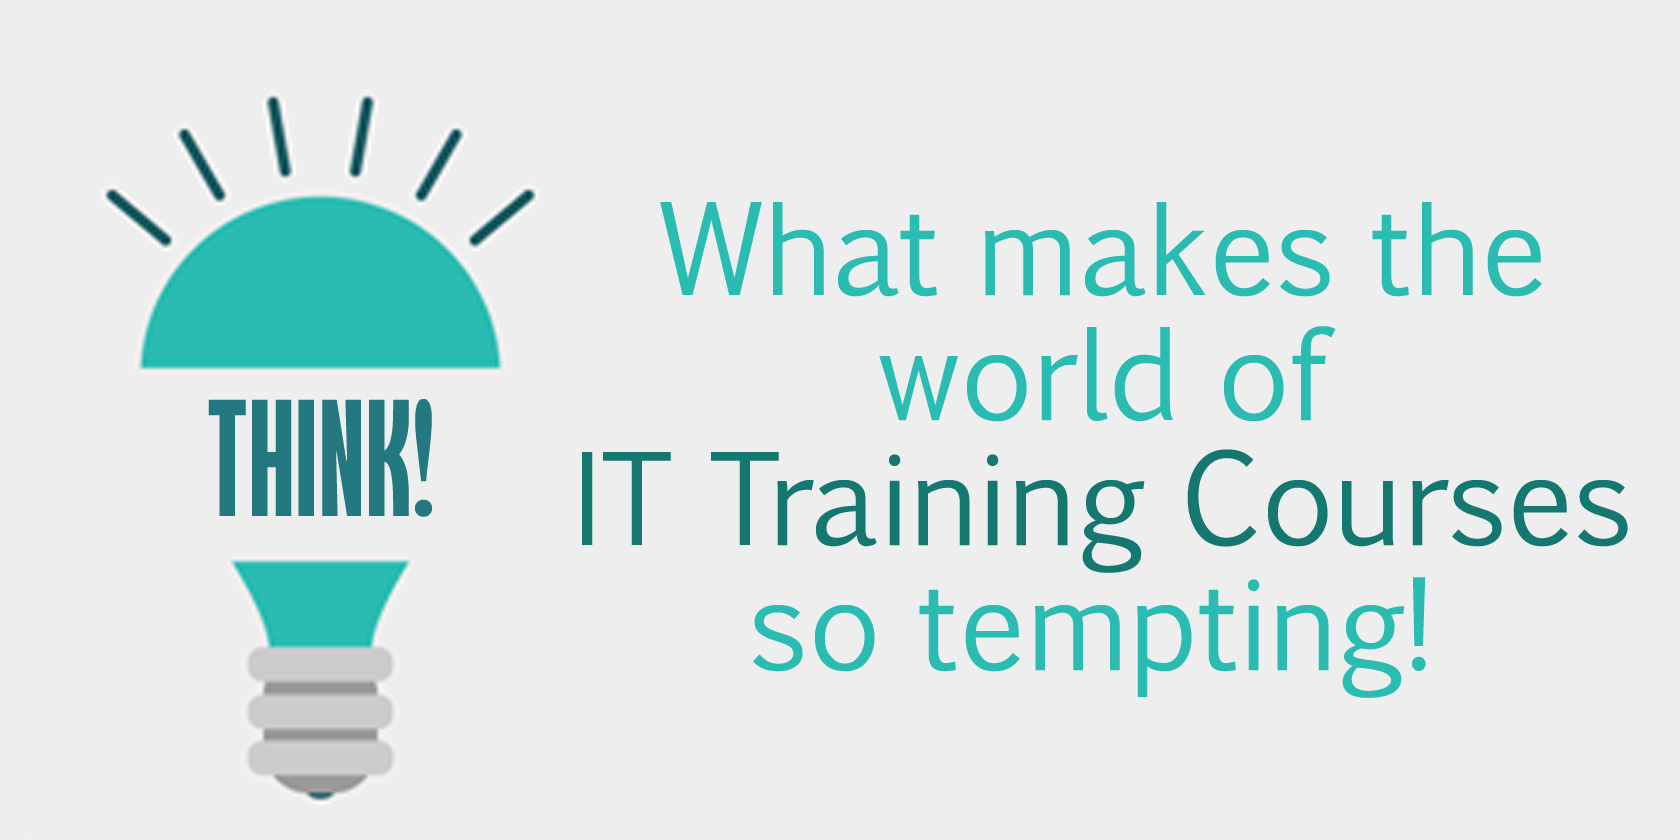 What makes the world of IT training courses so tempting!